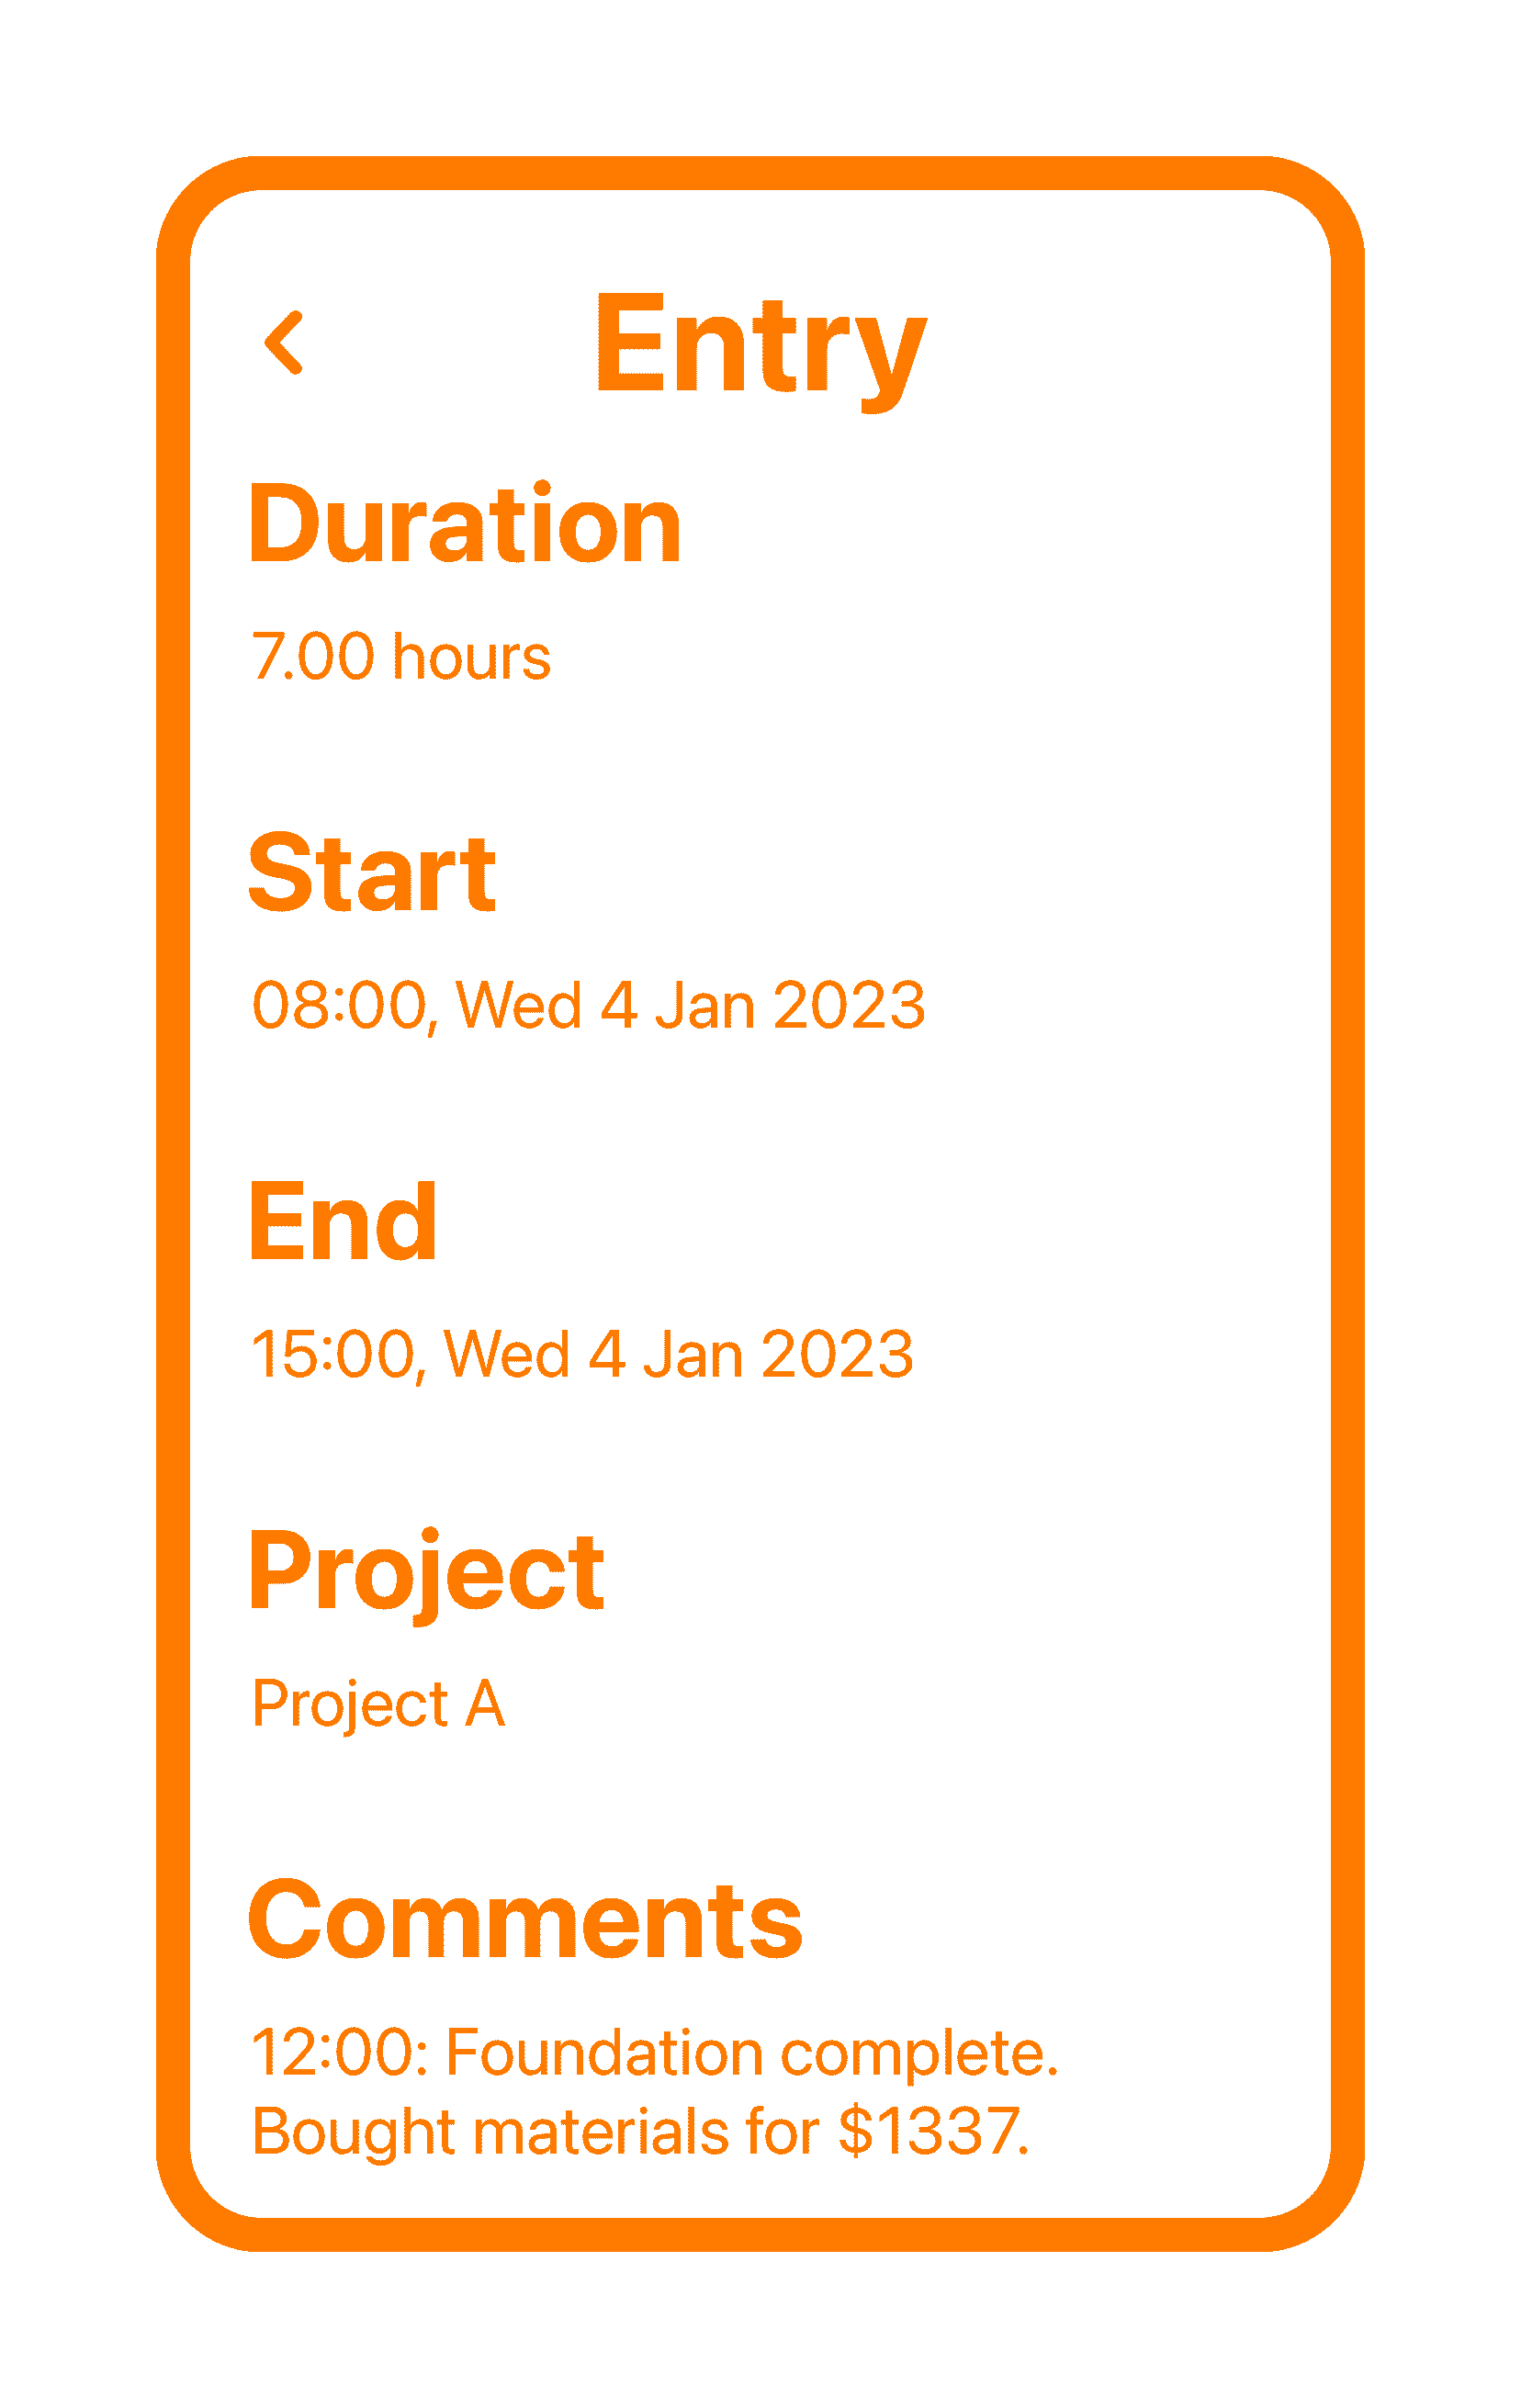 Tímavera mobile app screen showing a detail screen for a single time entry. Duration: 7.00 hours. Start: 08:00 Wed 4 Jan 2023. End: 15:00, Wed 4 Jan 2023. Project: Project A. Comment: 12:00, Foundation complete. Bought materials for $1337.